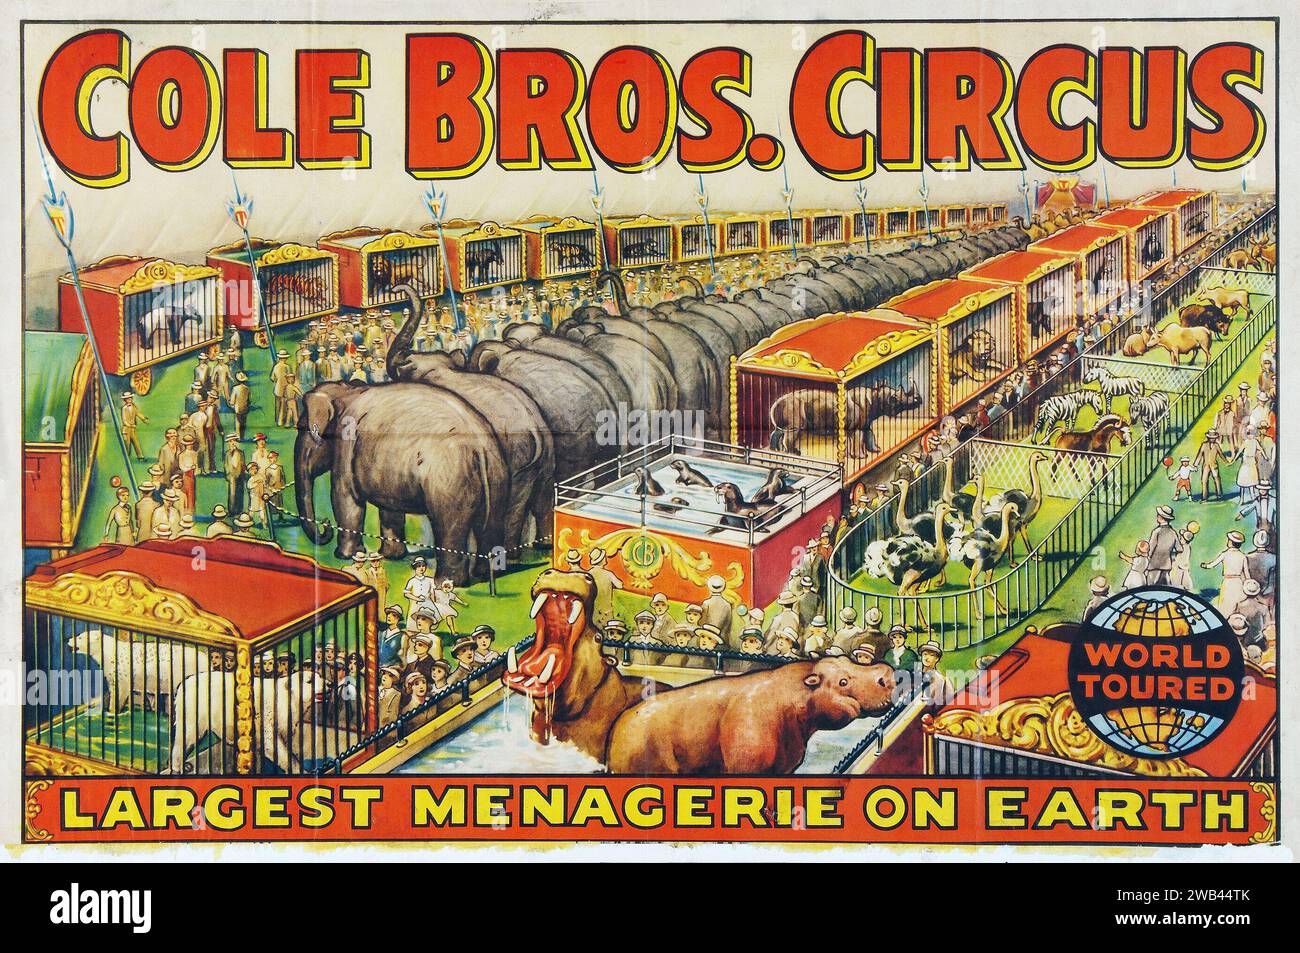 Circus Poster (Cole Brothers, 1930s) feat cages full of circus animals Stock Photo